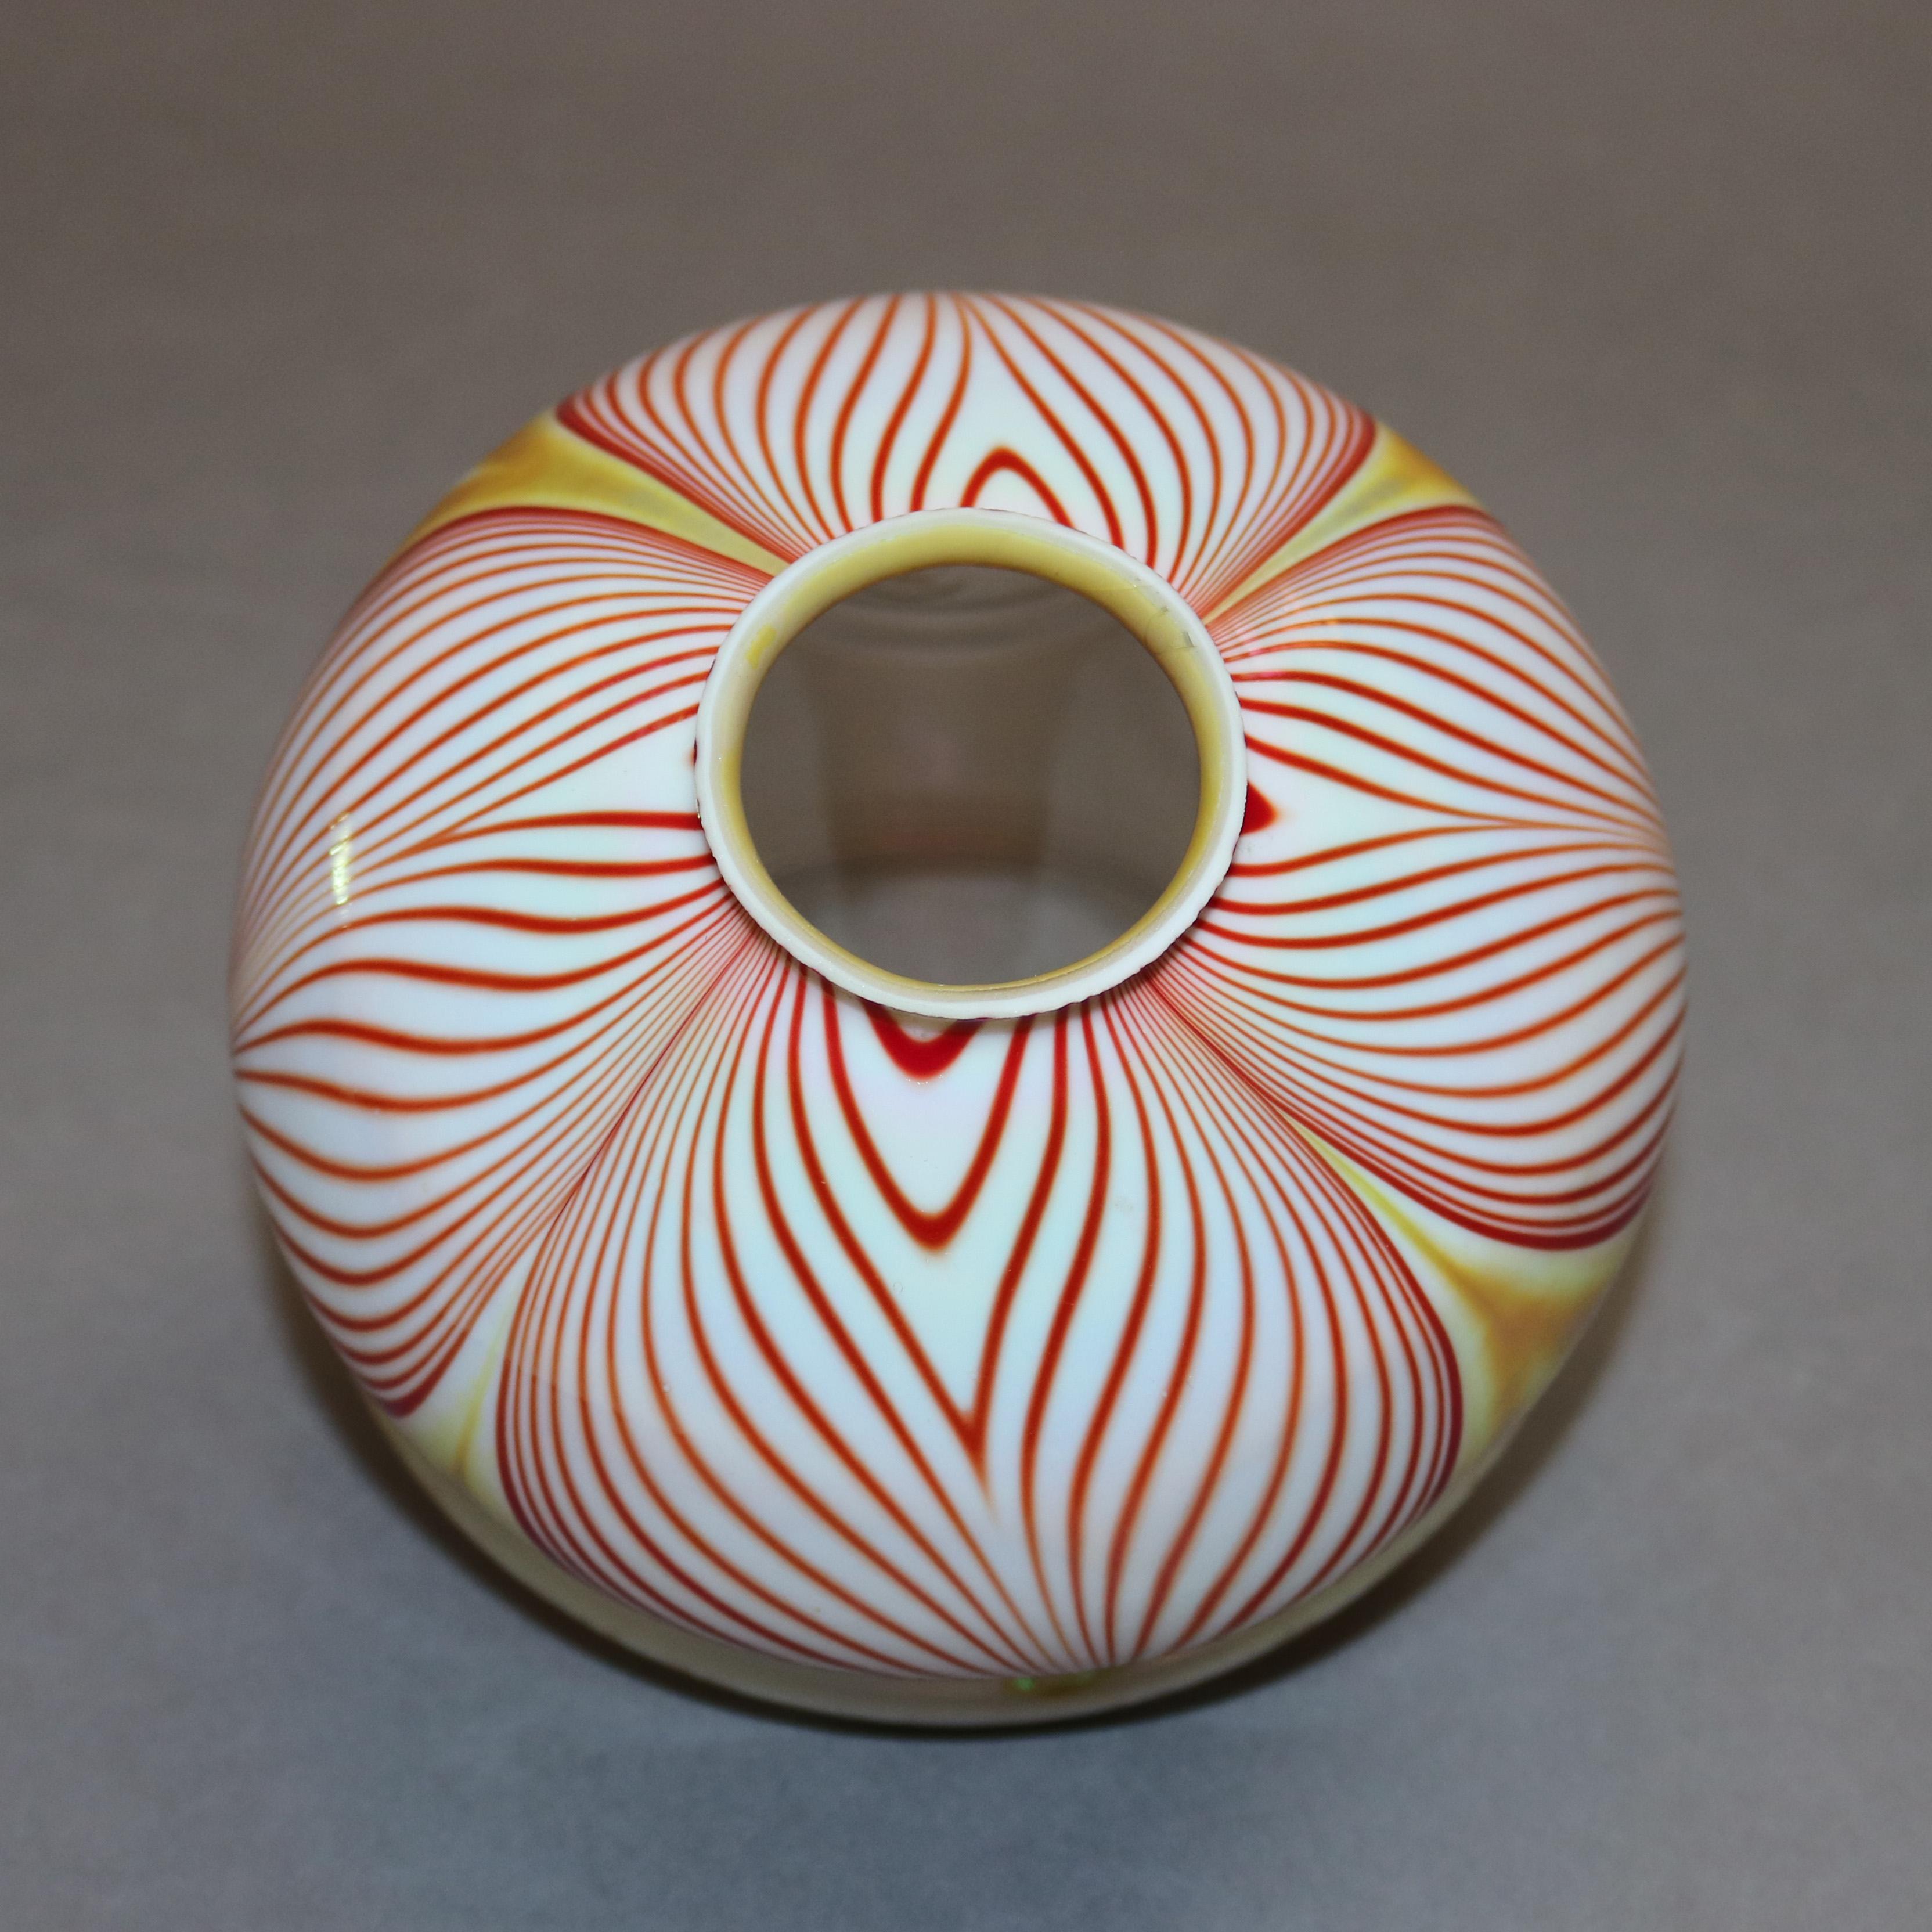 An antique art glass lamp shade in the manner of Quezal having bulbous form and red, white and gold pulled feather design with gold interior and flared rim, signed Zephyr Glass on collar interior as photographed, 20th century

Measures: 3.75